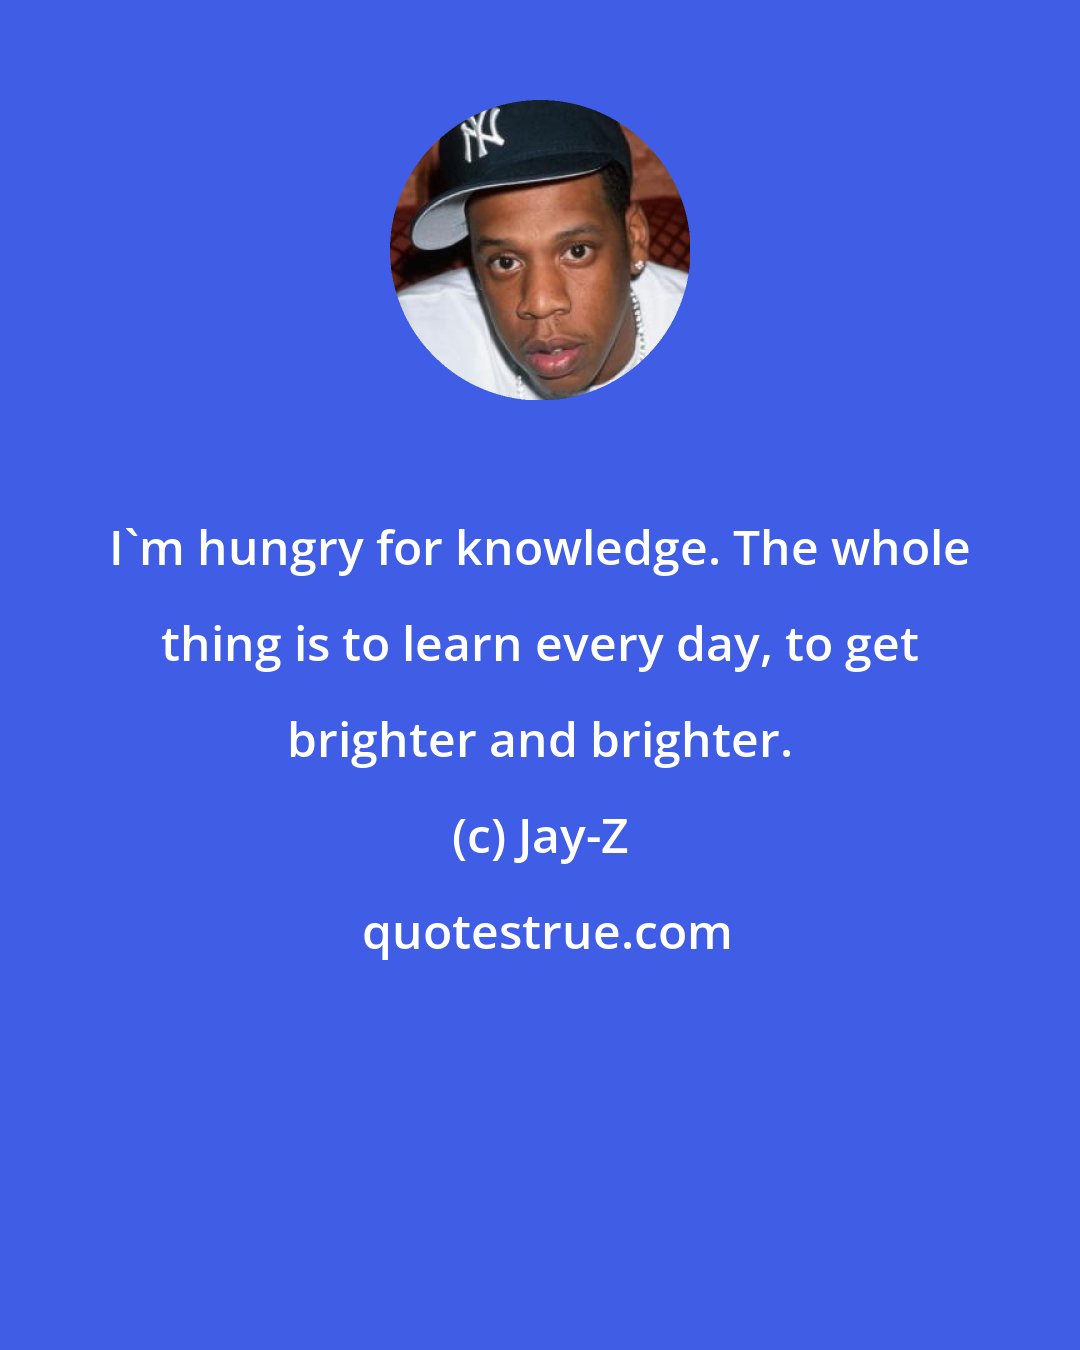 Jay-Z: I'm hungry for knowledge. The whole thing is to learn every day, to get brighter and brighter.